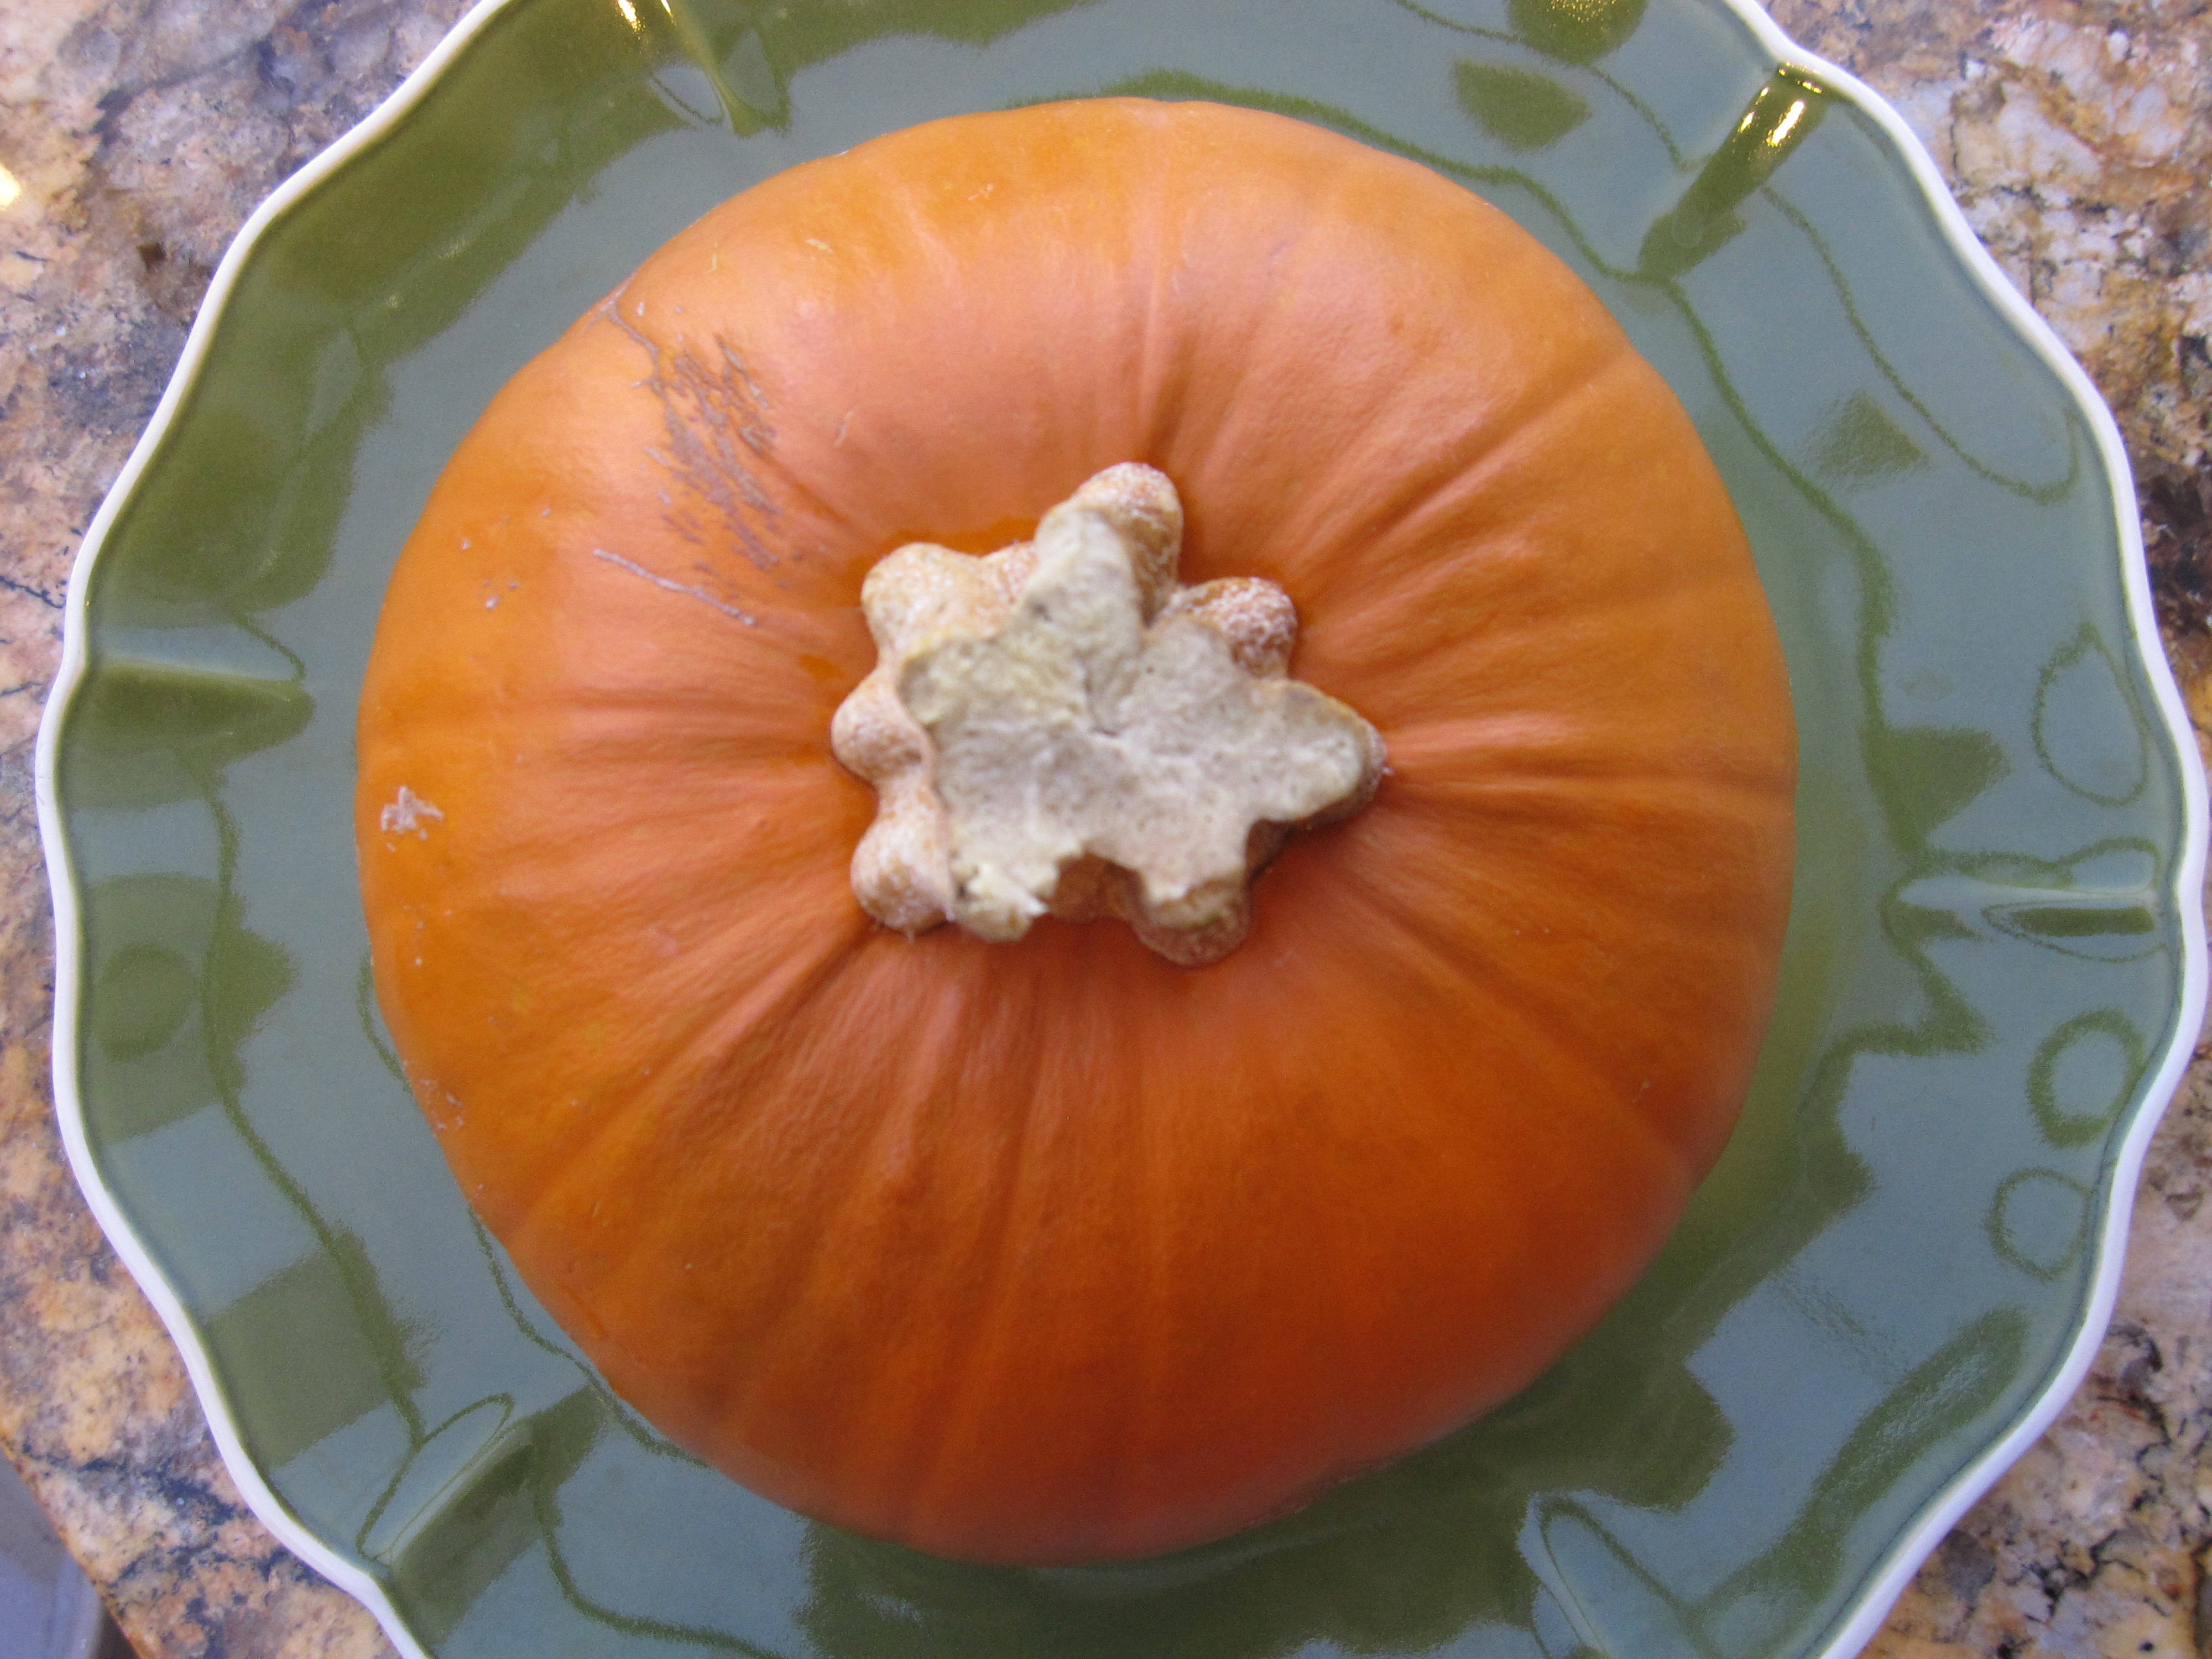 An overhead view of a pumpkin on a green and blue plate.